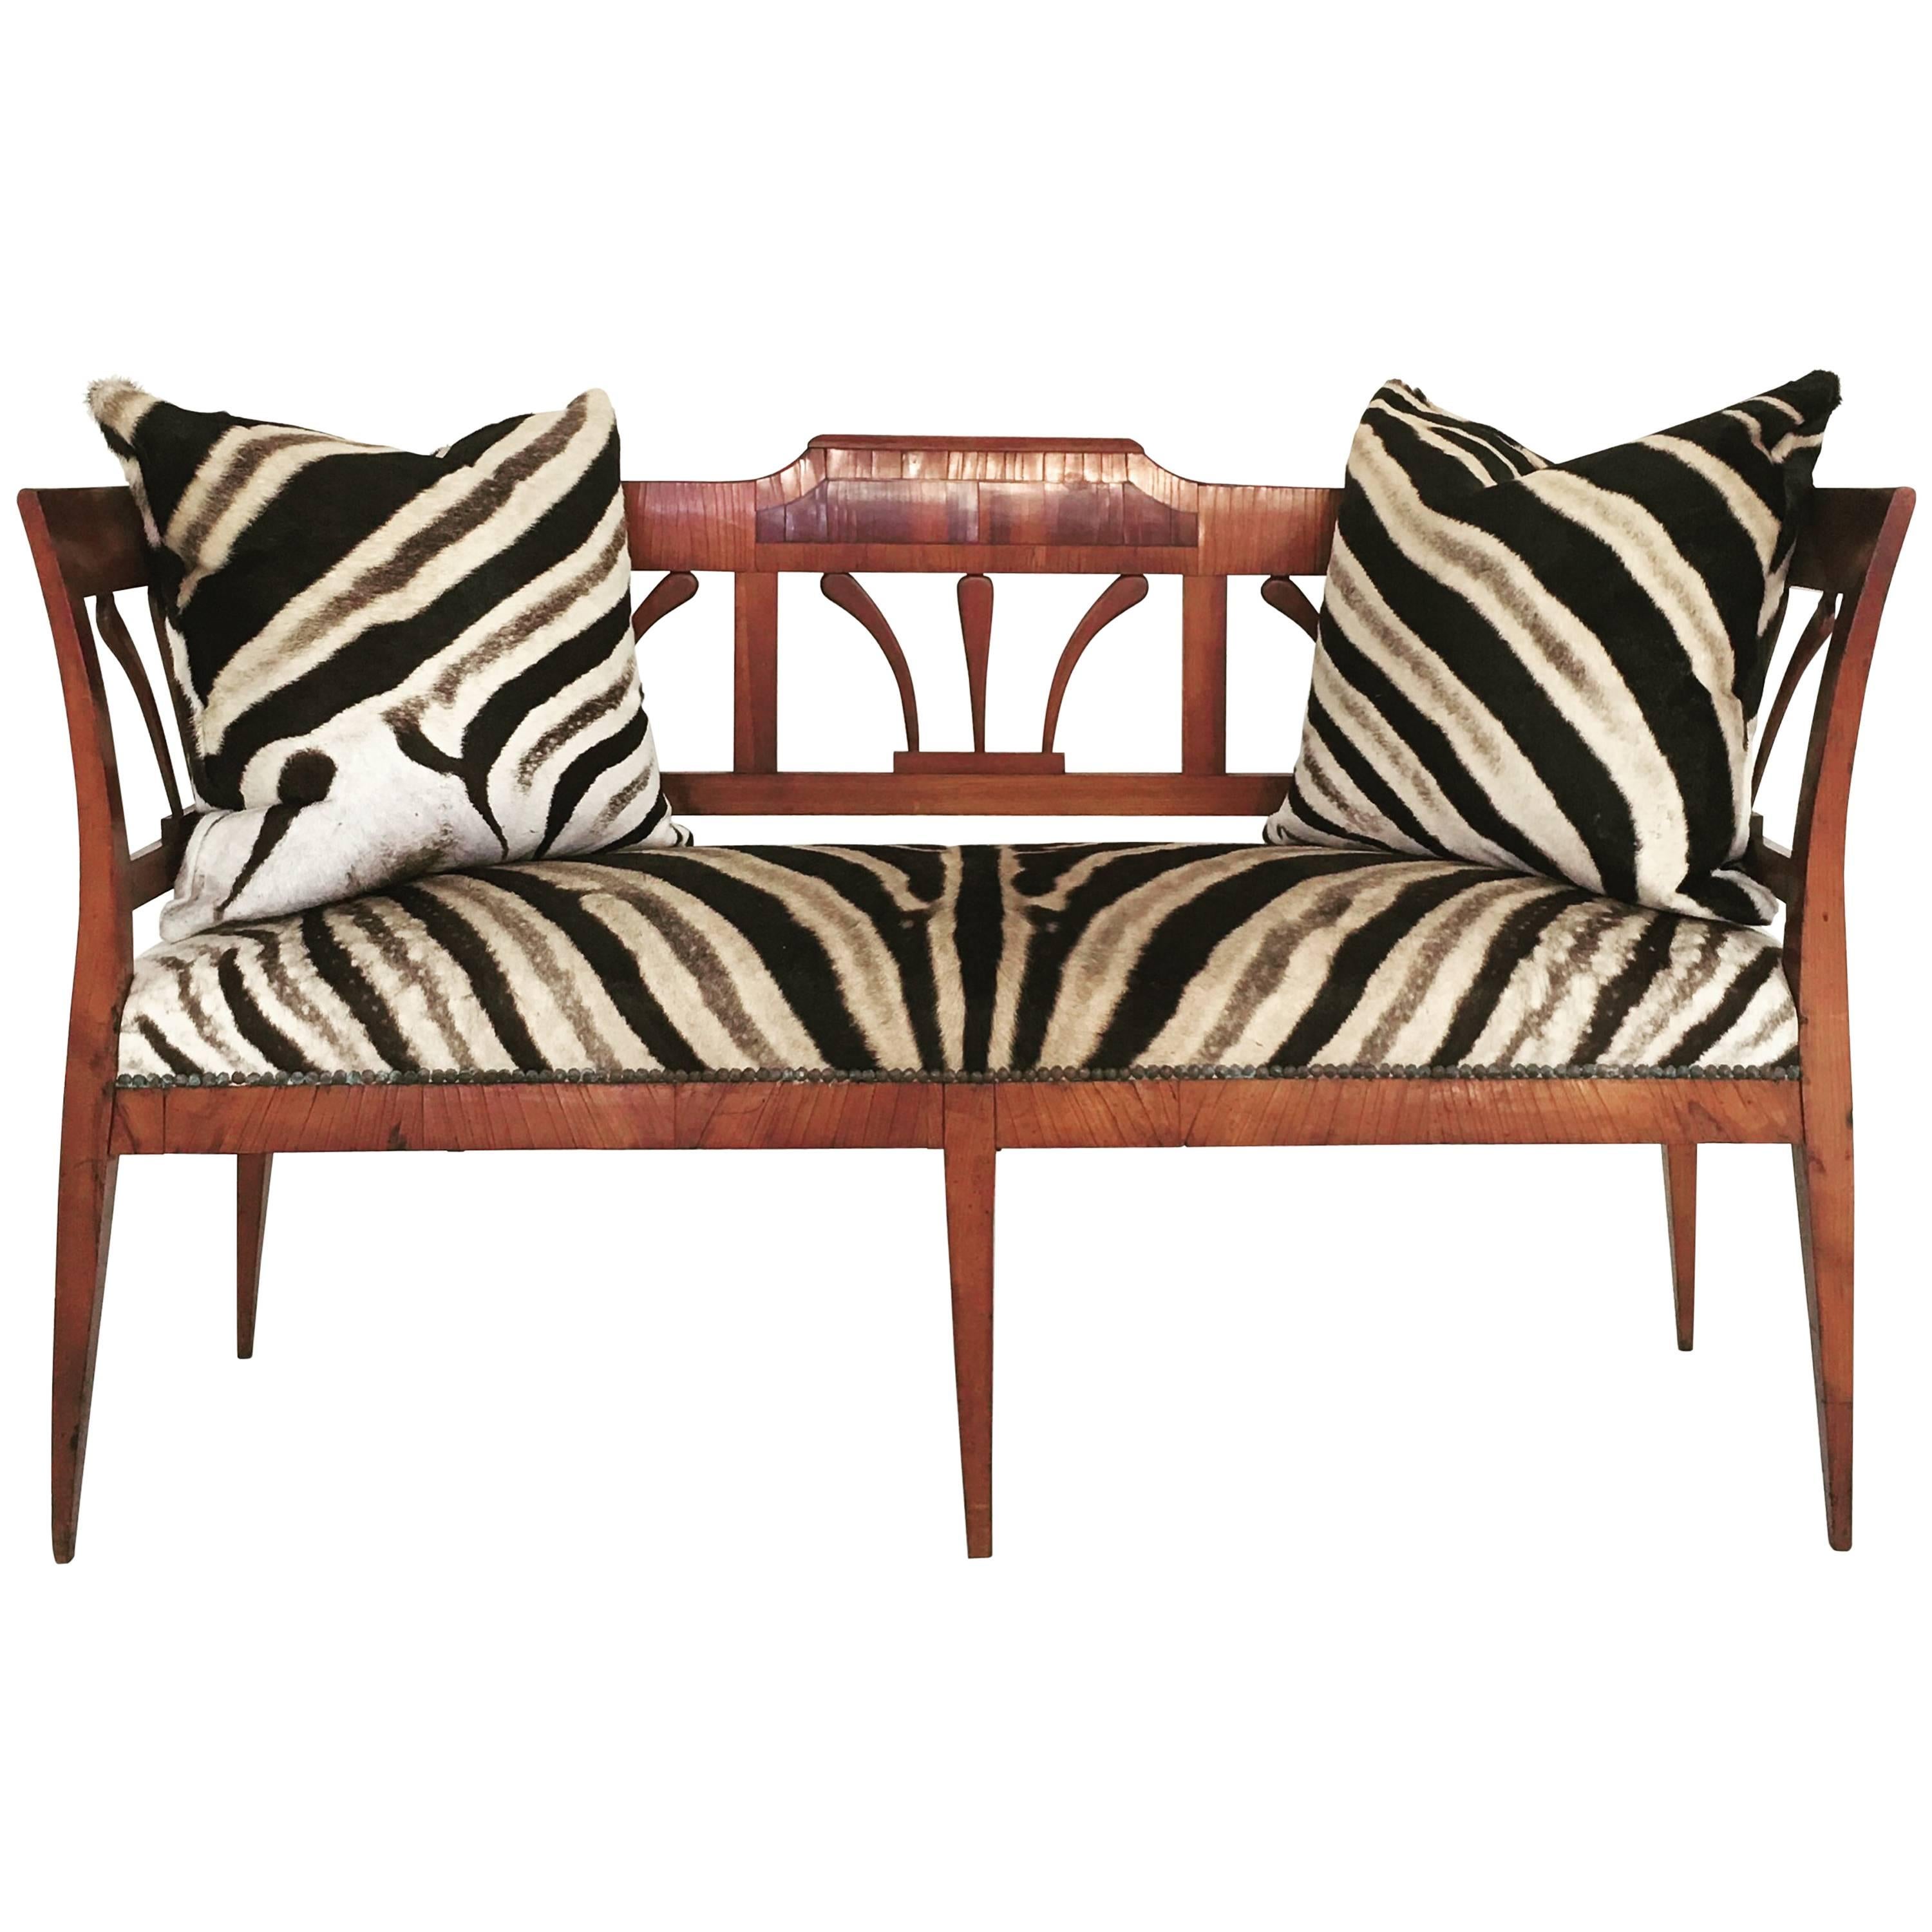 19th Century Fruitwood and Rosewood Settee in Zebra Hide with Zebra Pillows